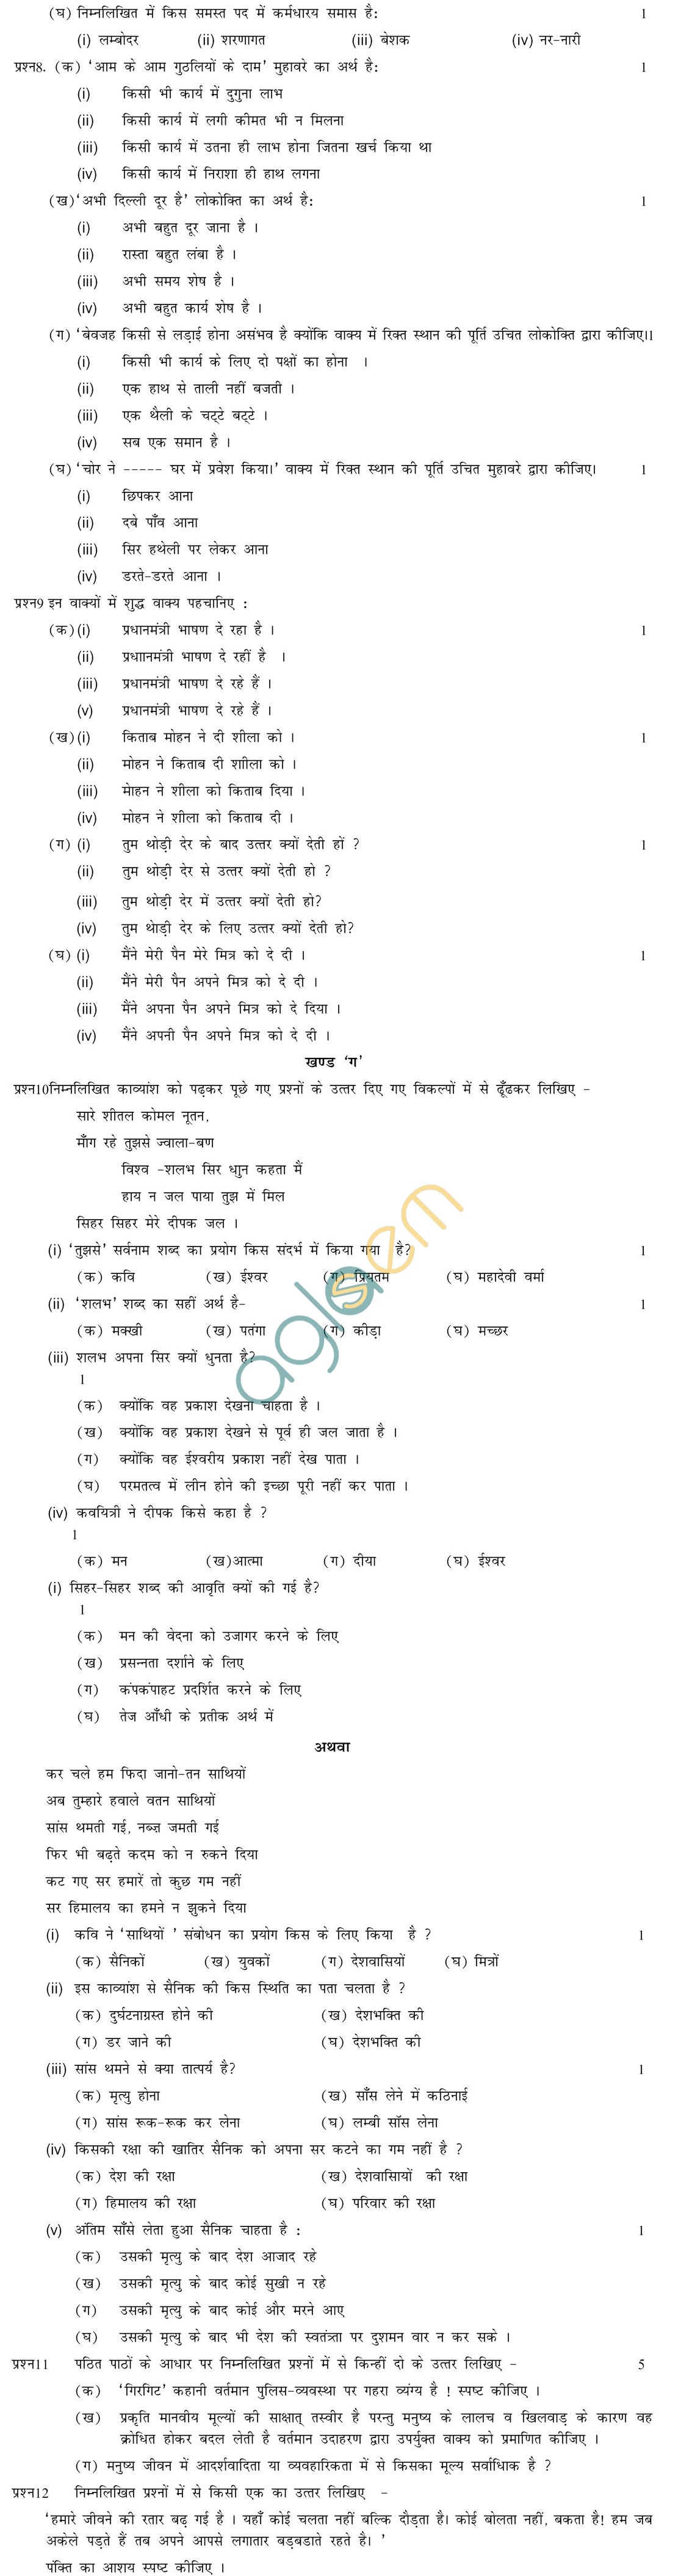 hindi essays for class 9th